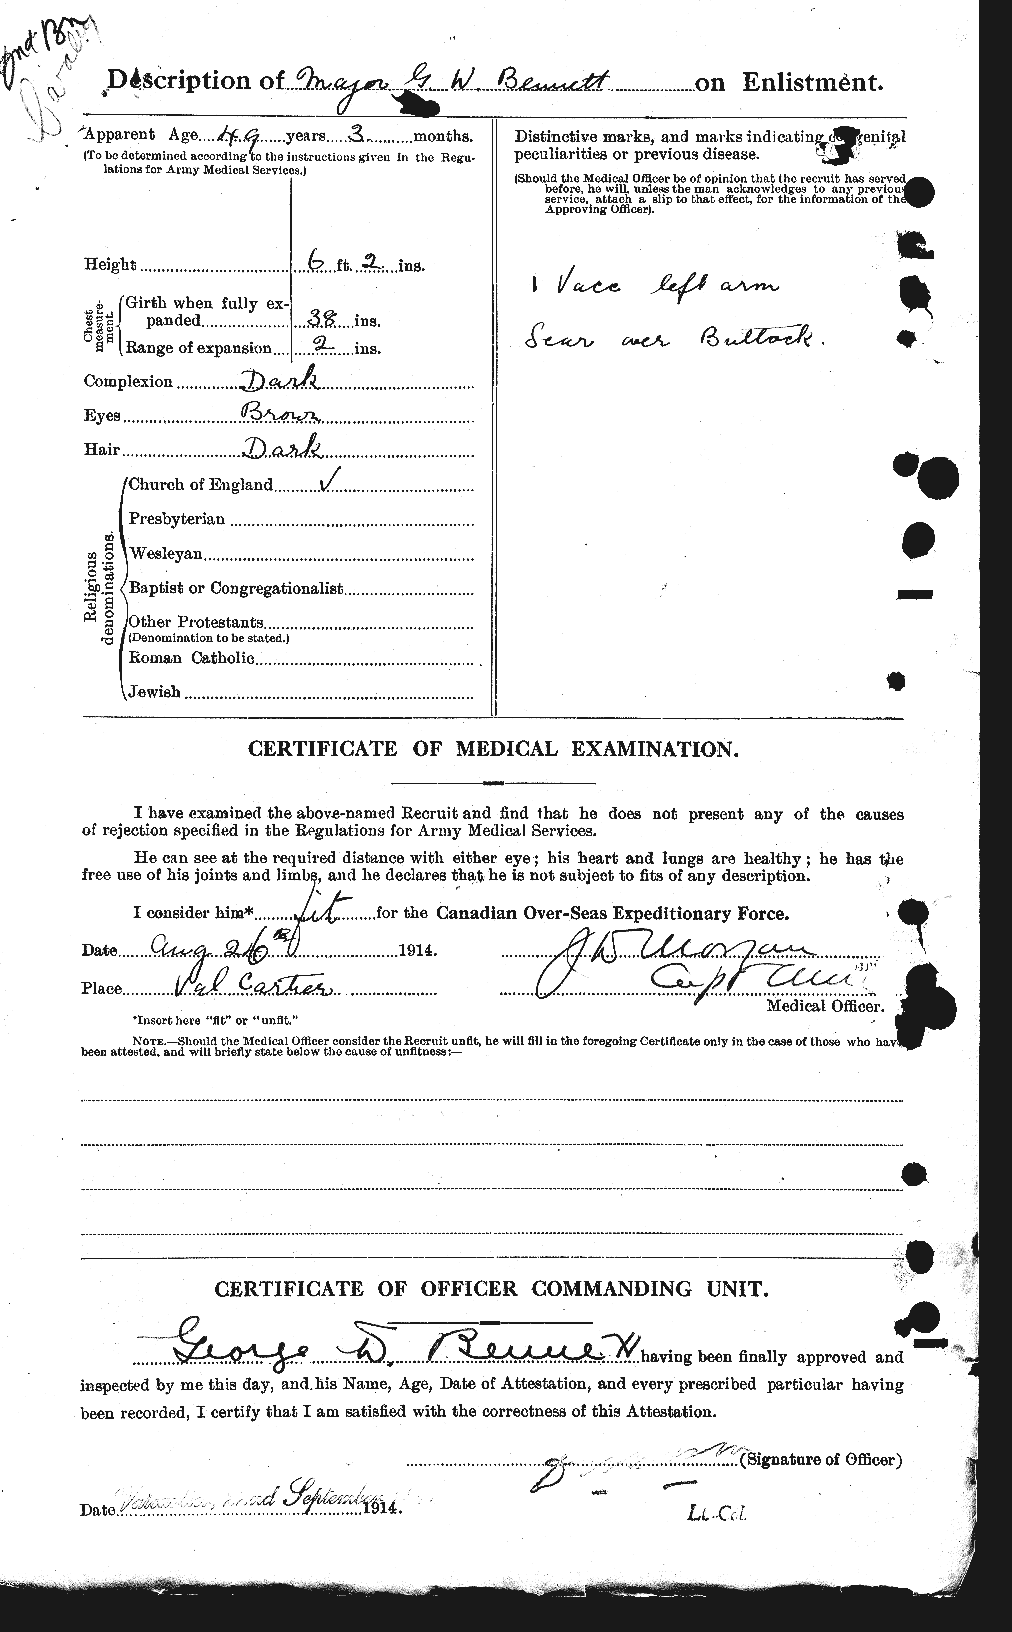 Personnel Records of the First World War - CEF 238424b